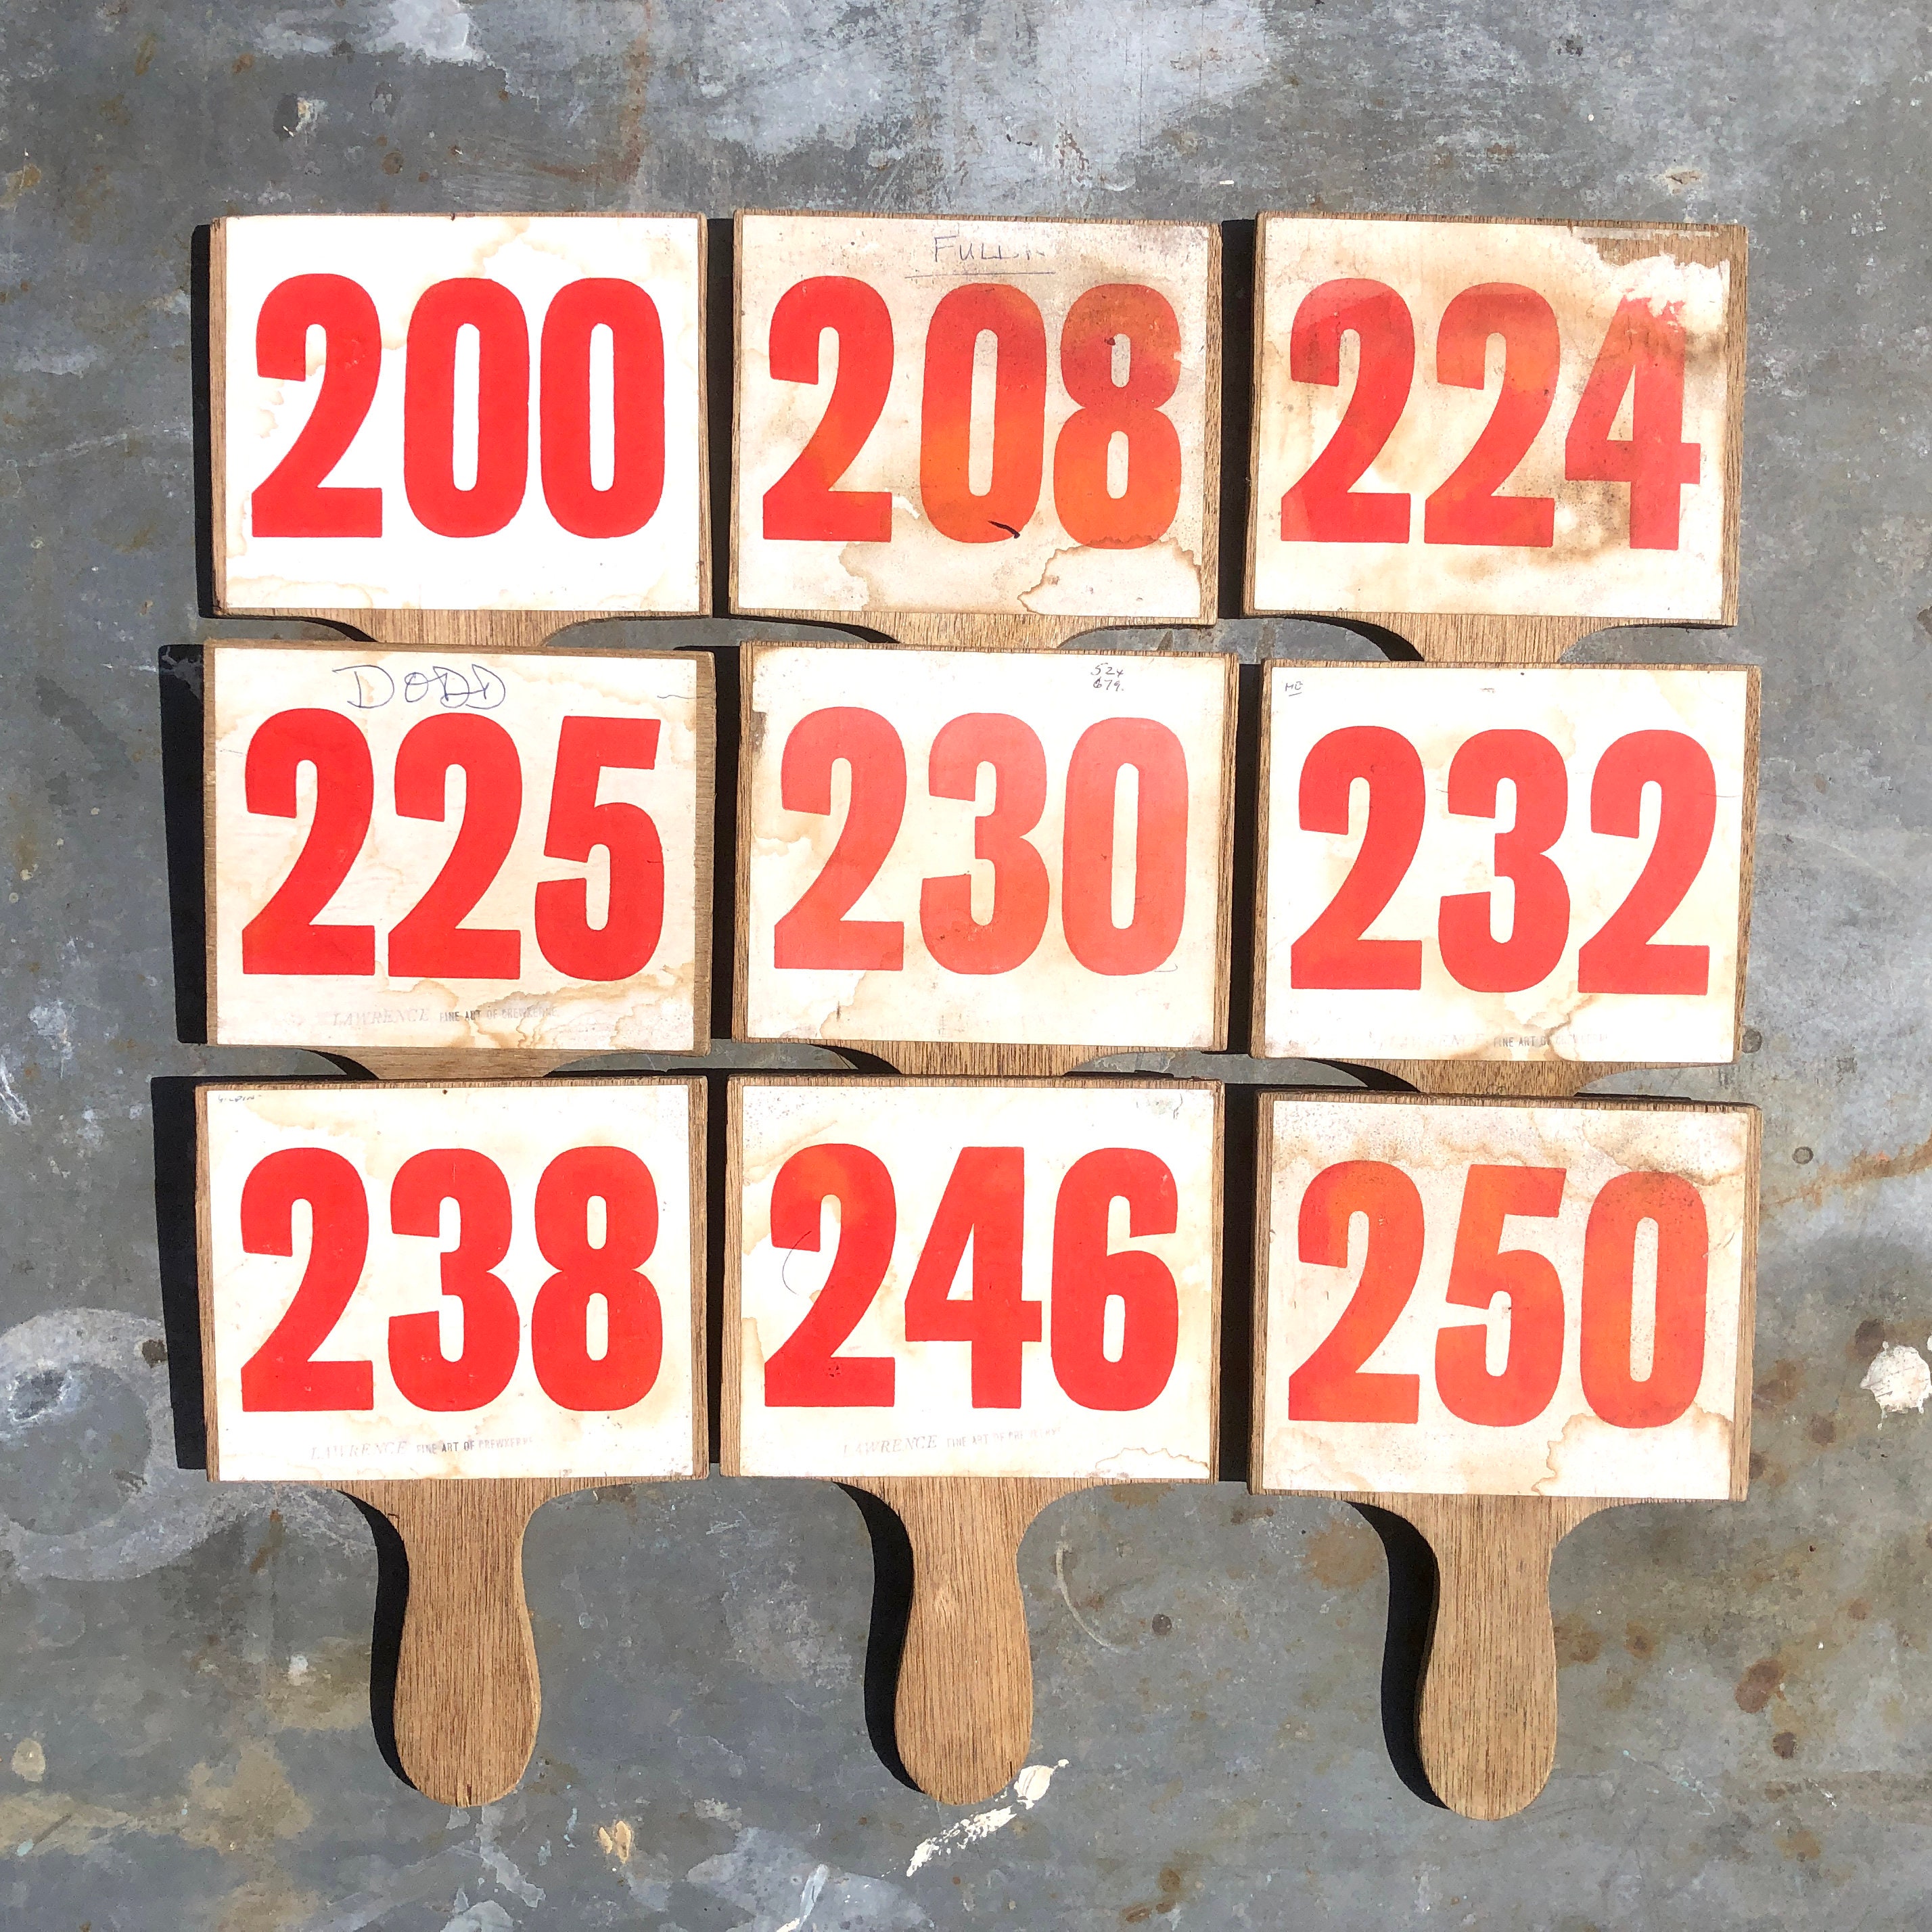 Buy Vintage Auction Paddles, They Look Great as Part of a Vintage Display.  Listing is for One Paddle. Online in India 